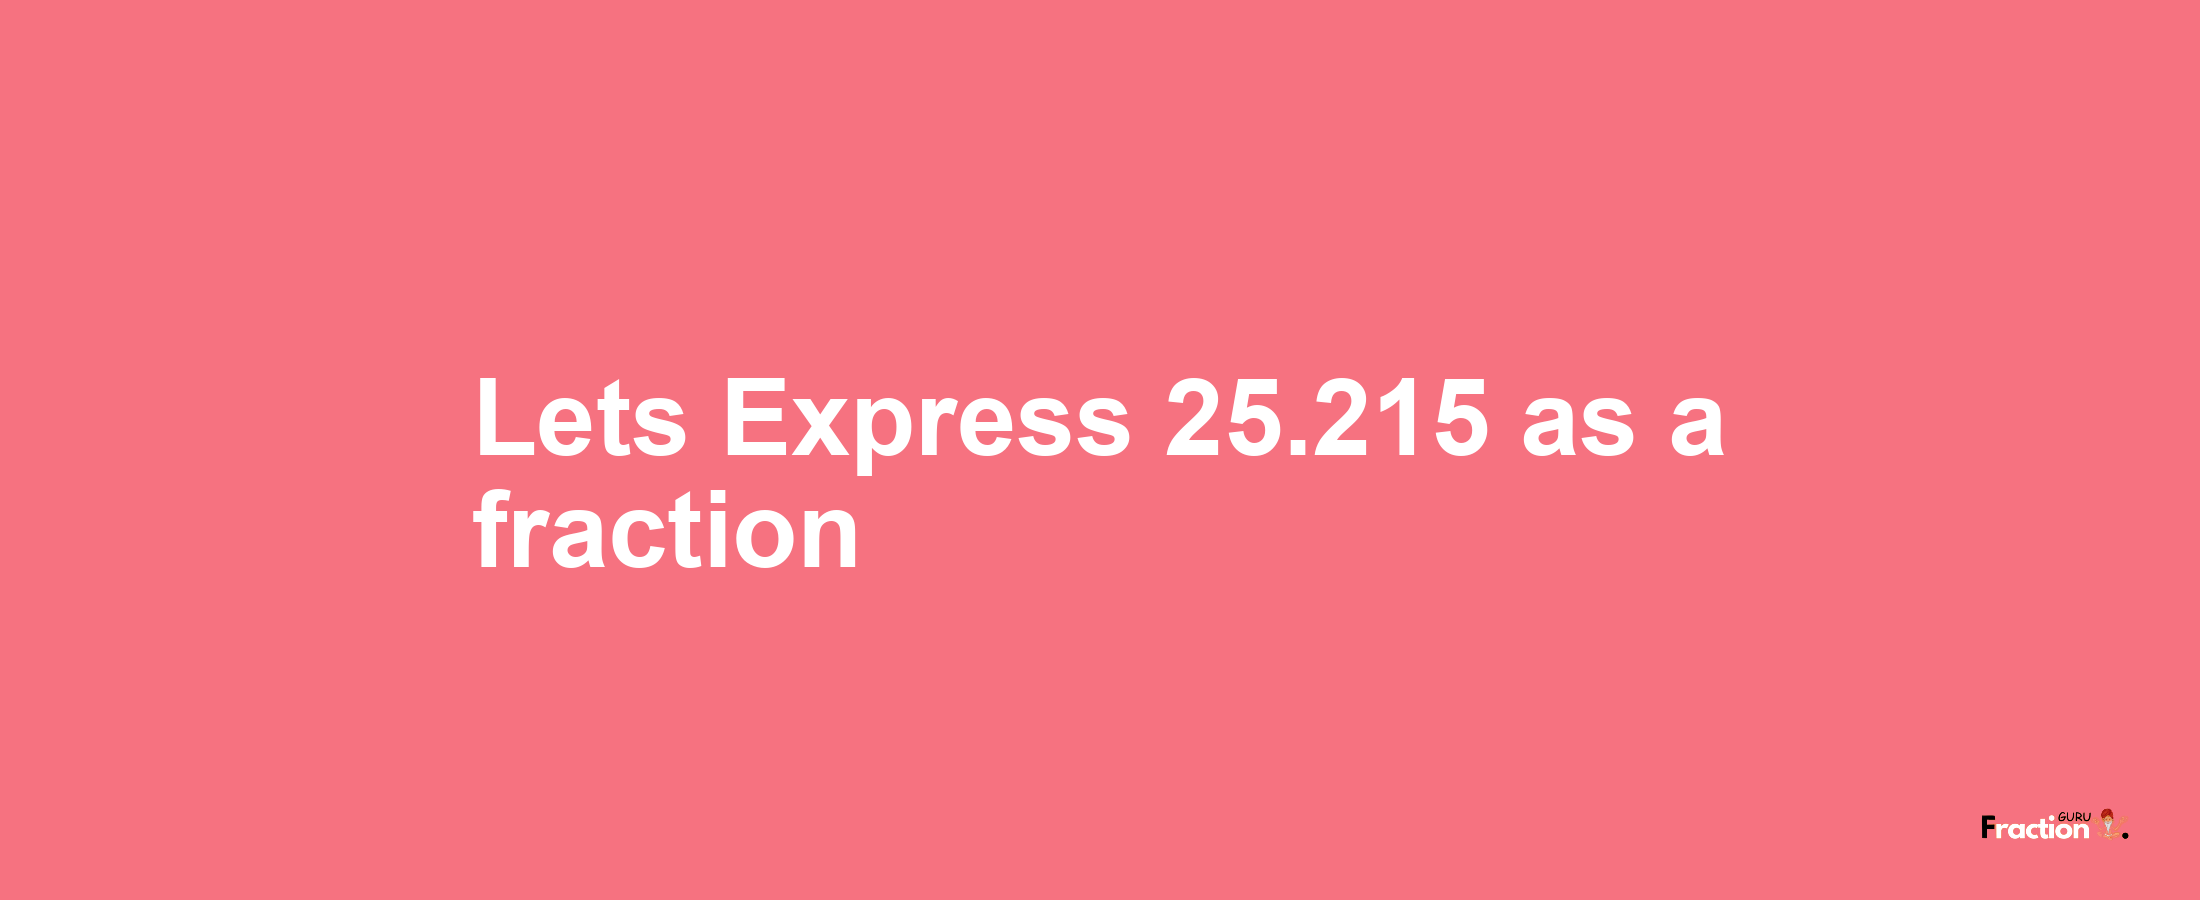 Lets Express 25.215 as afraction